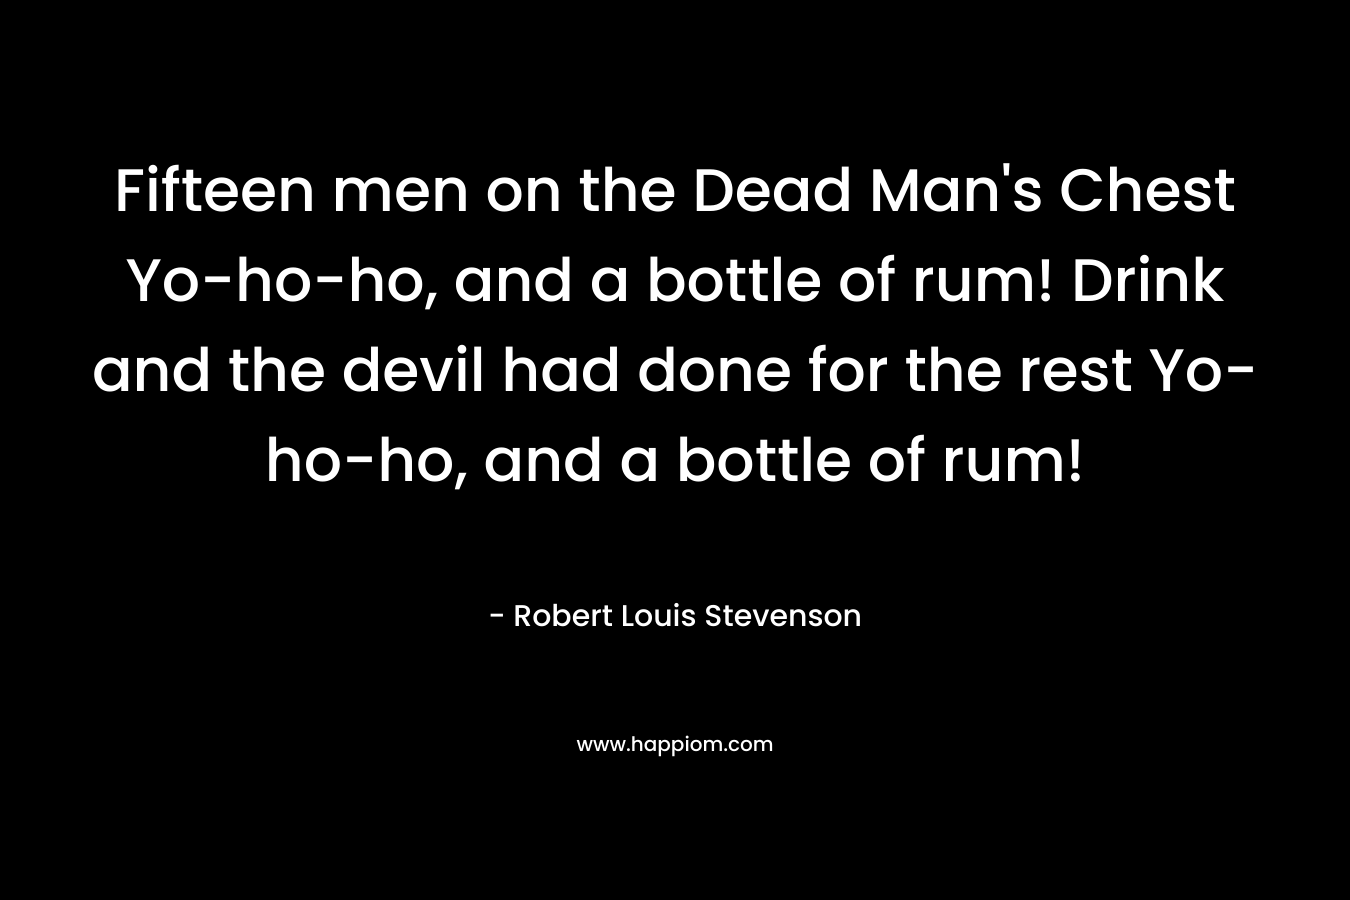 Fifteen men on the Dead Man's Chest Yo-ho-ho, and a bottle of rum! Drink and the devil had done for the rest Yo-ho-ho, and a bottle of rum!